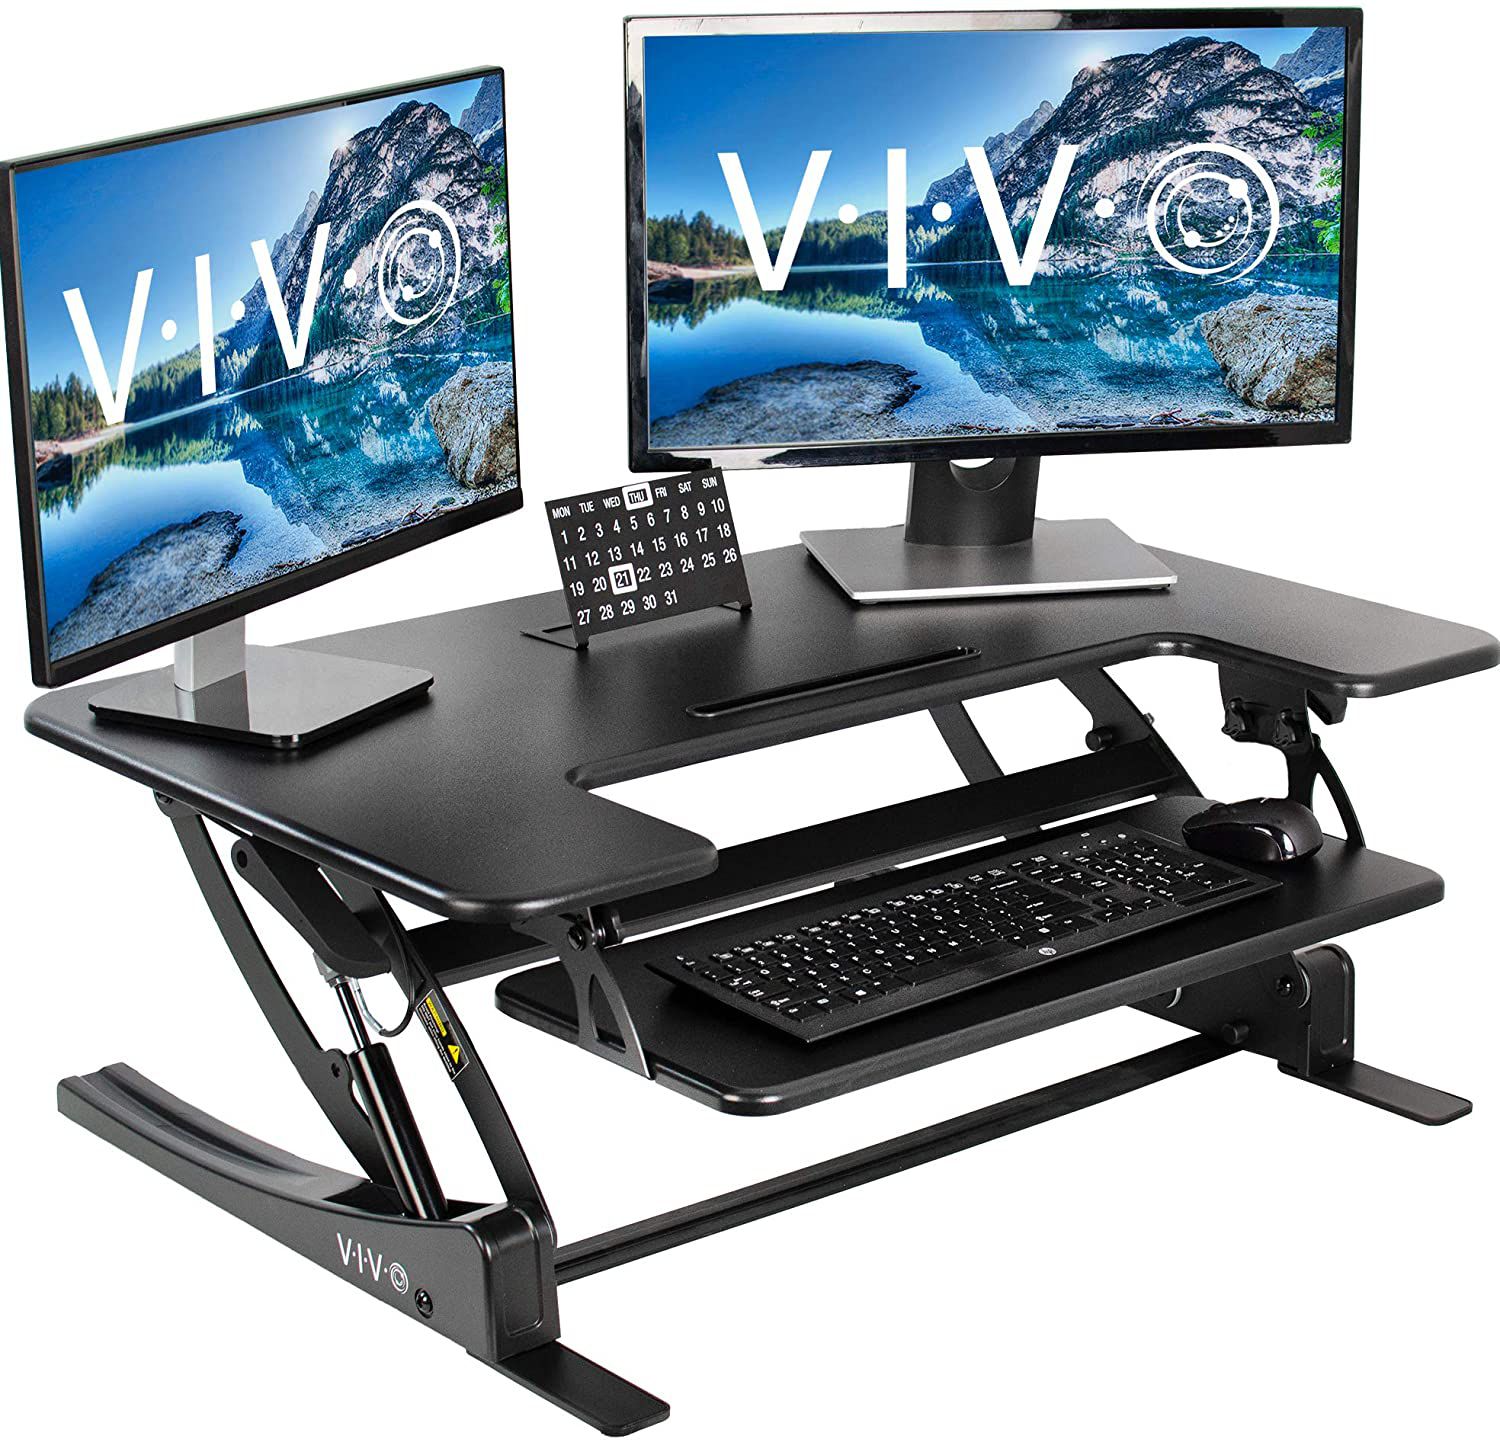 Height Adjustable 36 inch Stand up Desk Converter Quick Sit to Stand Tabletop Dual Monitor Riser NEW IN BOX